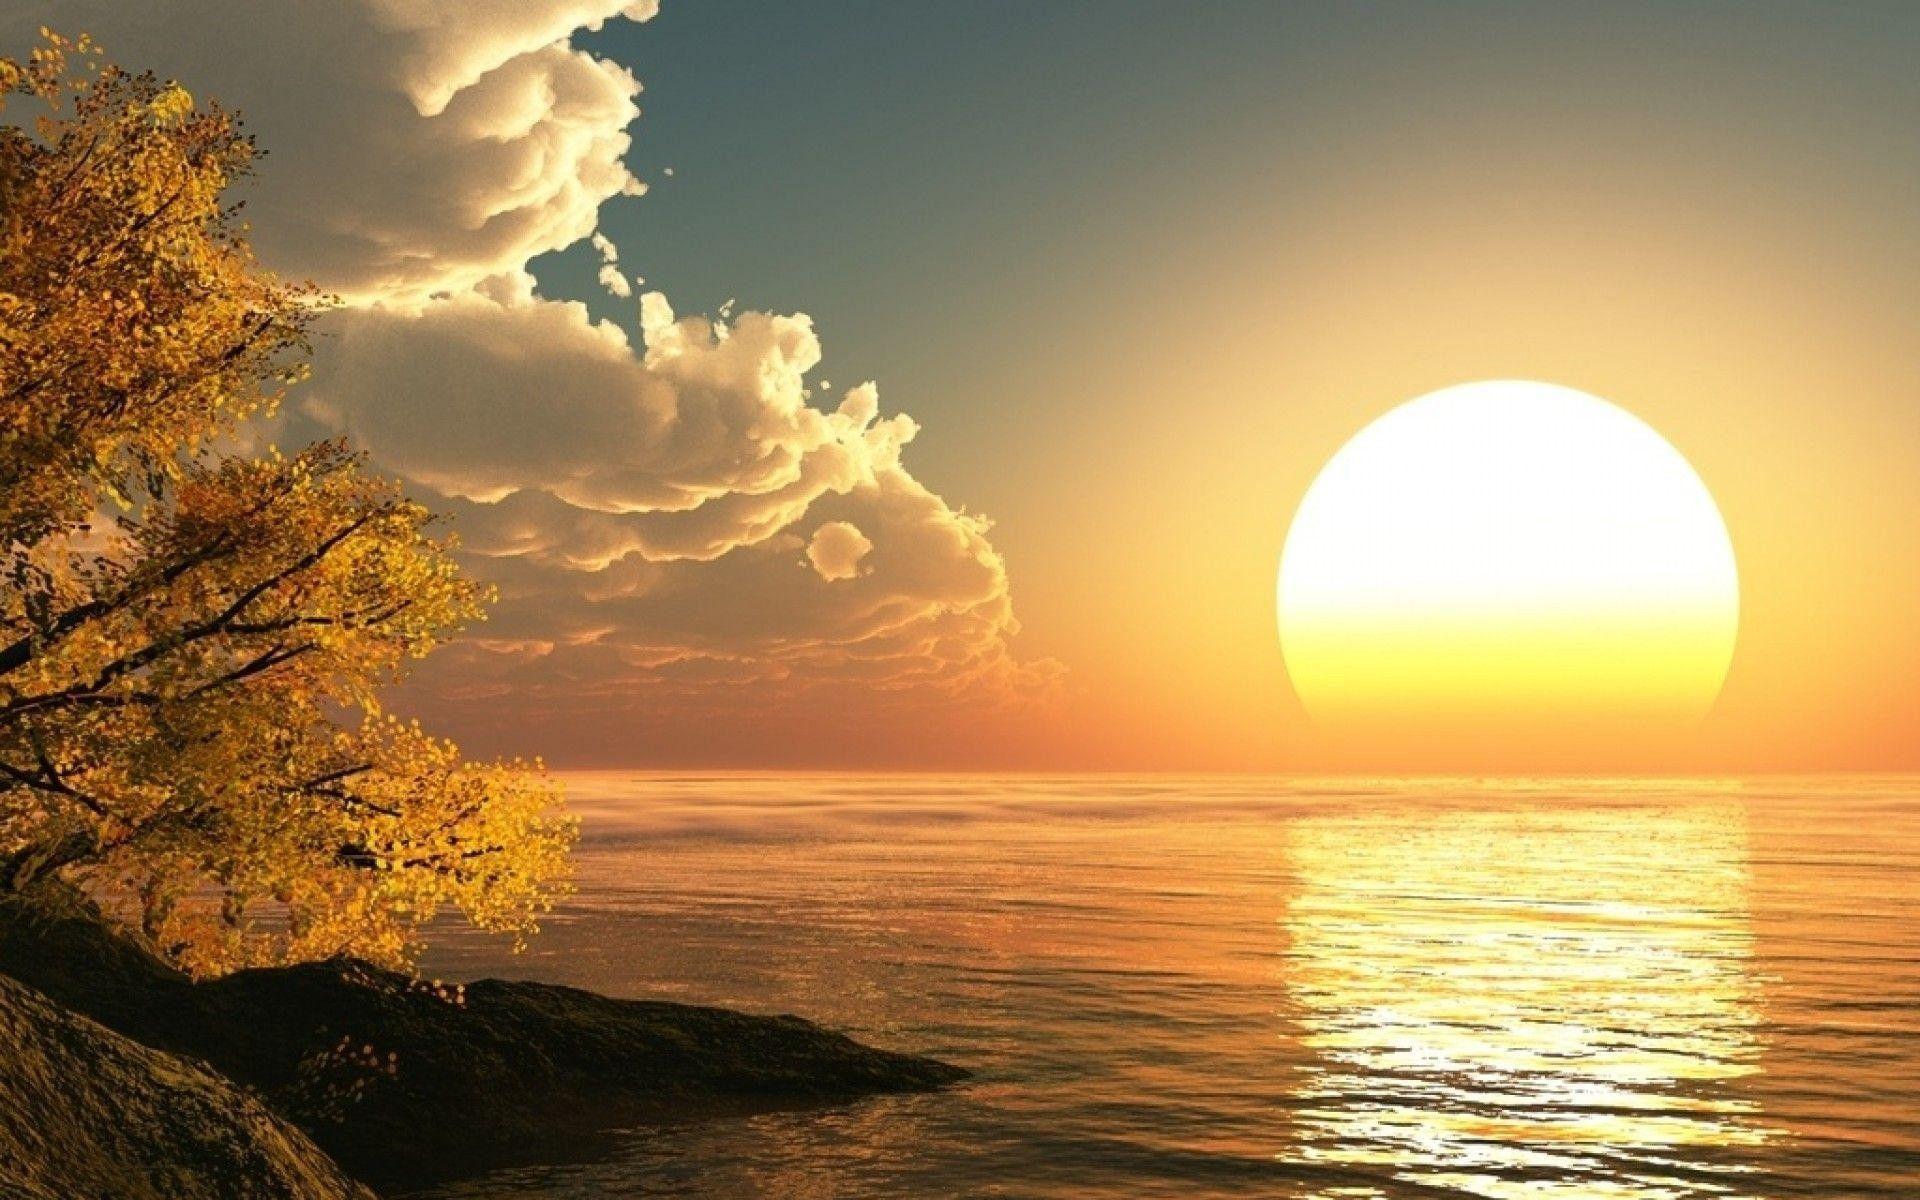 Sunrise Nature Wallpapers - Top Free Sunrise Nature Backgrounds